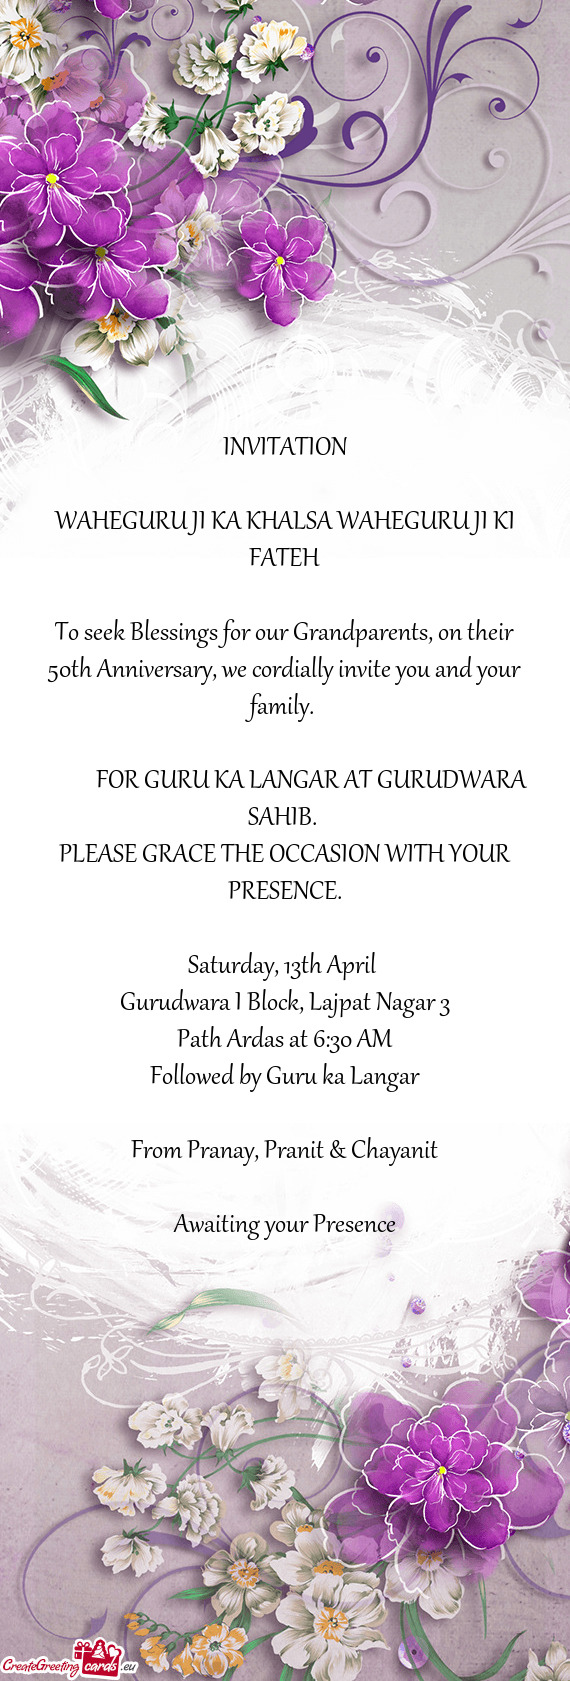 To seek Blessings for our Grandparents, on their 50th Anniversary, we cordially invite you and your